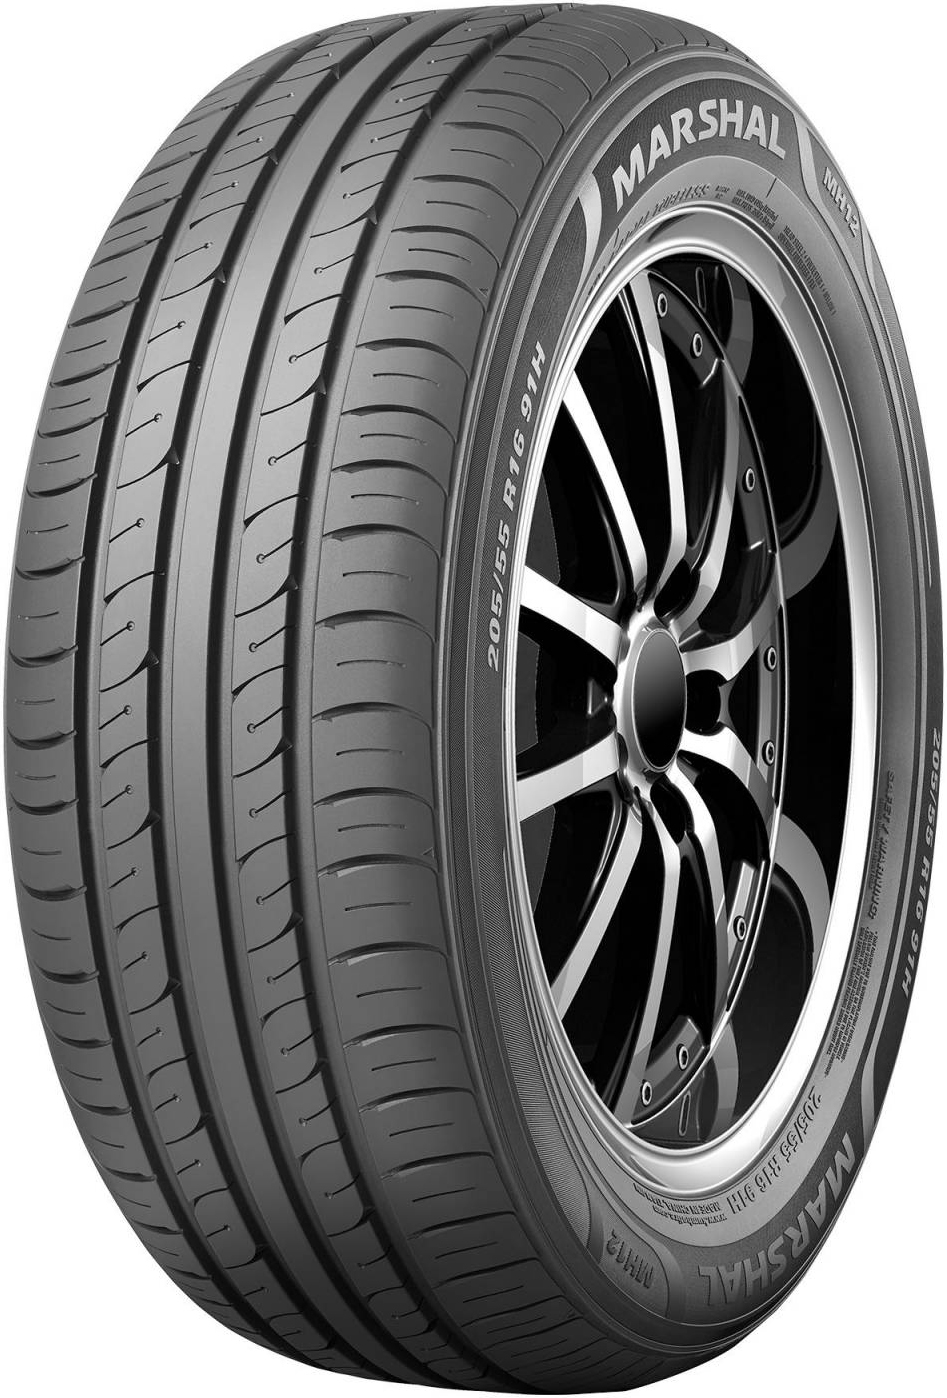 Anvelope auto MARSHAL MH12 135/80 R13 70T